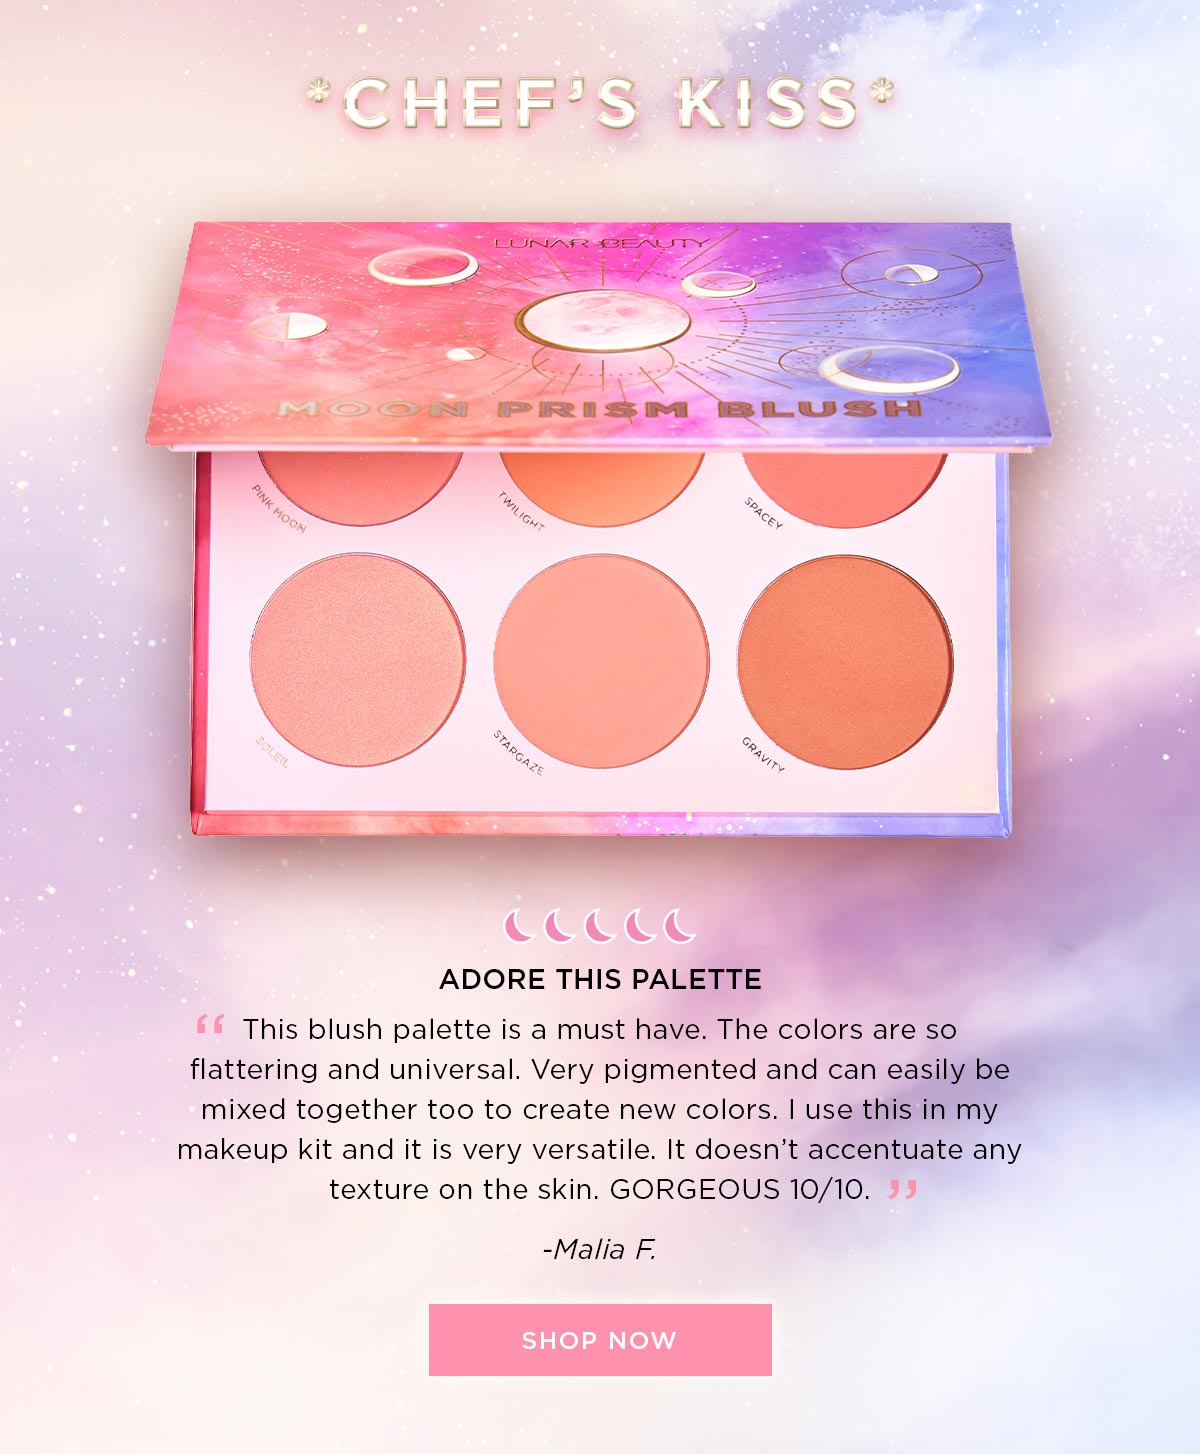  CCCCC ADORE THIS PALETTE This blush palette is a must have. The colors are so flattering and universal. Very pigmented and can easily mixed together too to create new colors. use th makeup kit and it is very versatile. It doesnt a texture on the skin. GORGEOUS 1010. -Malia F. 